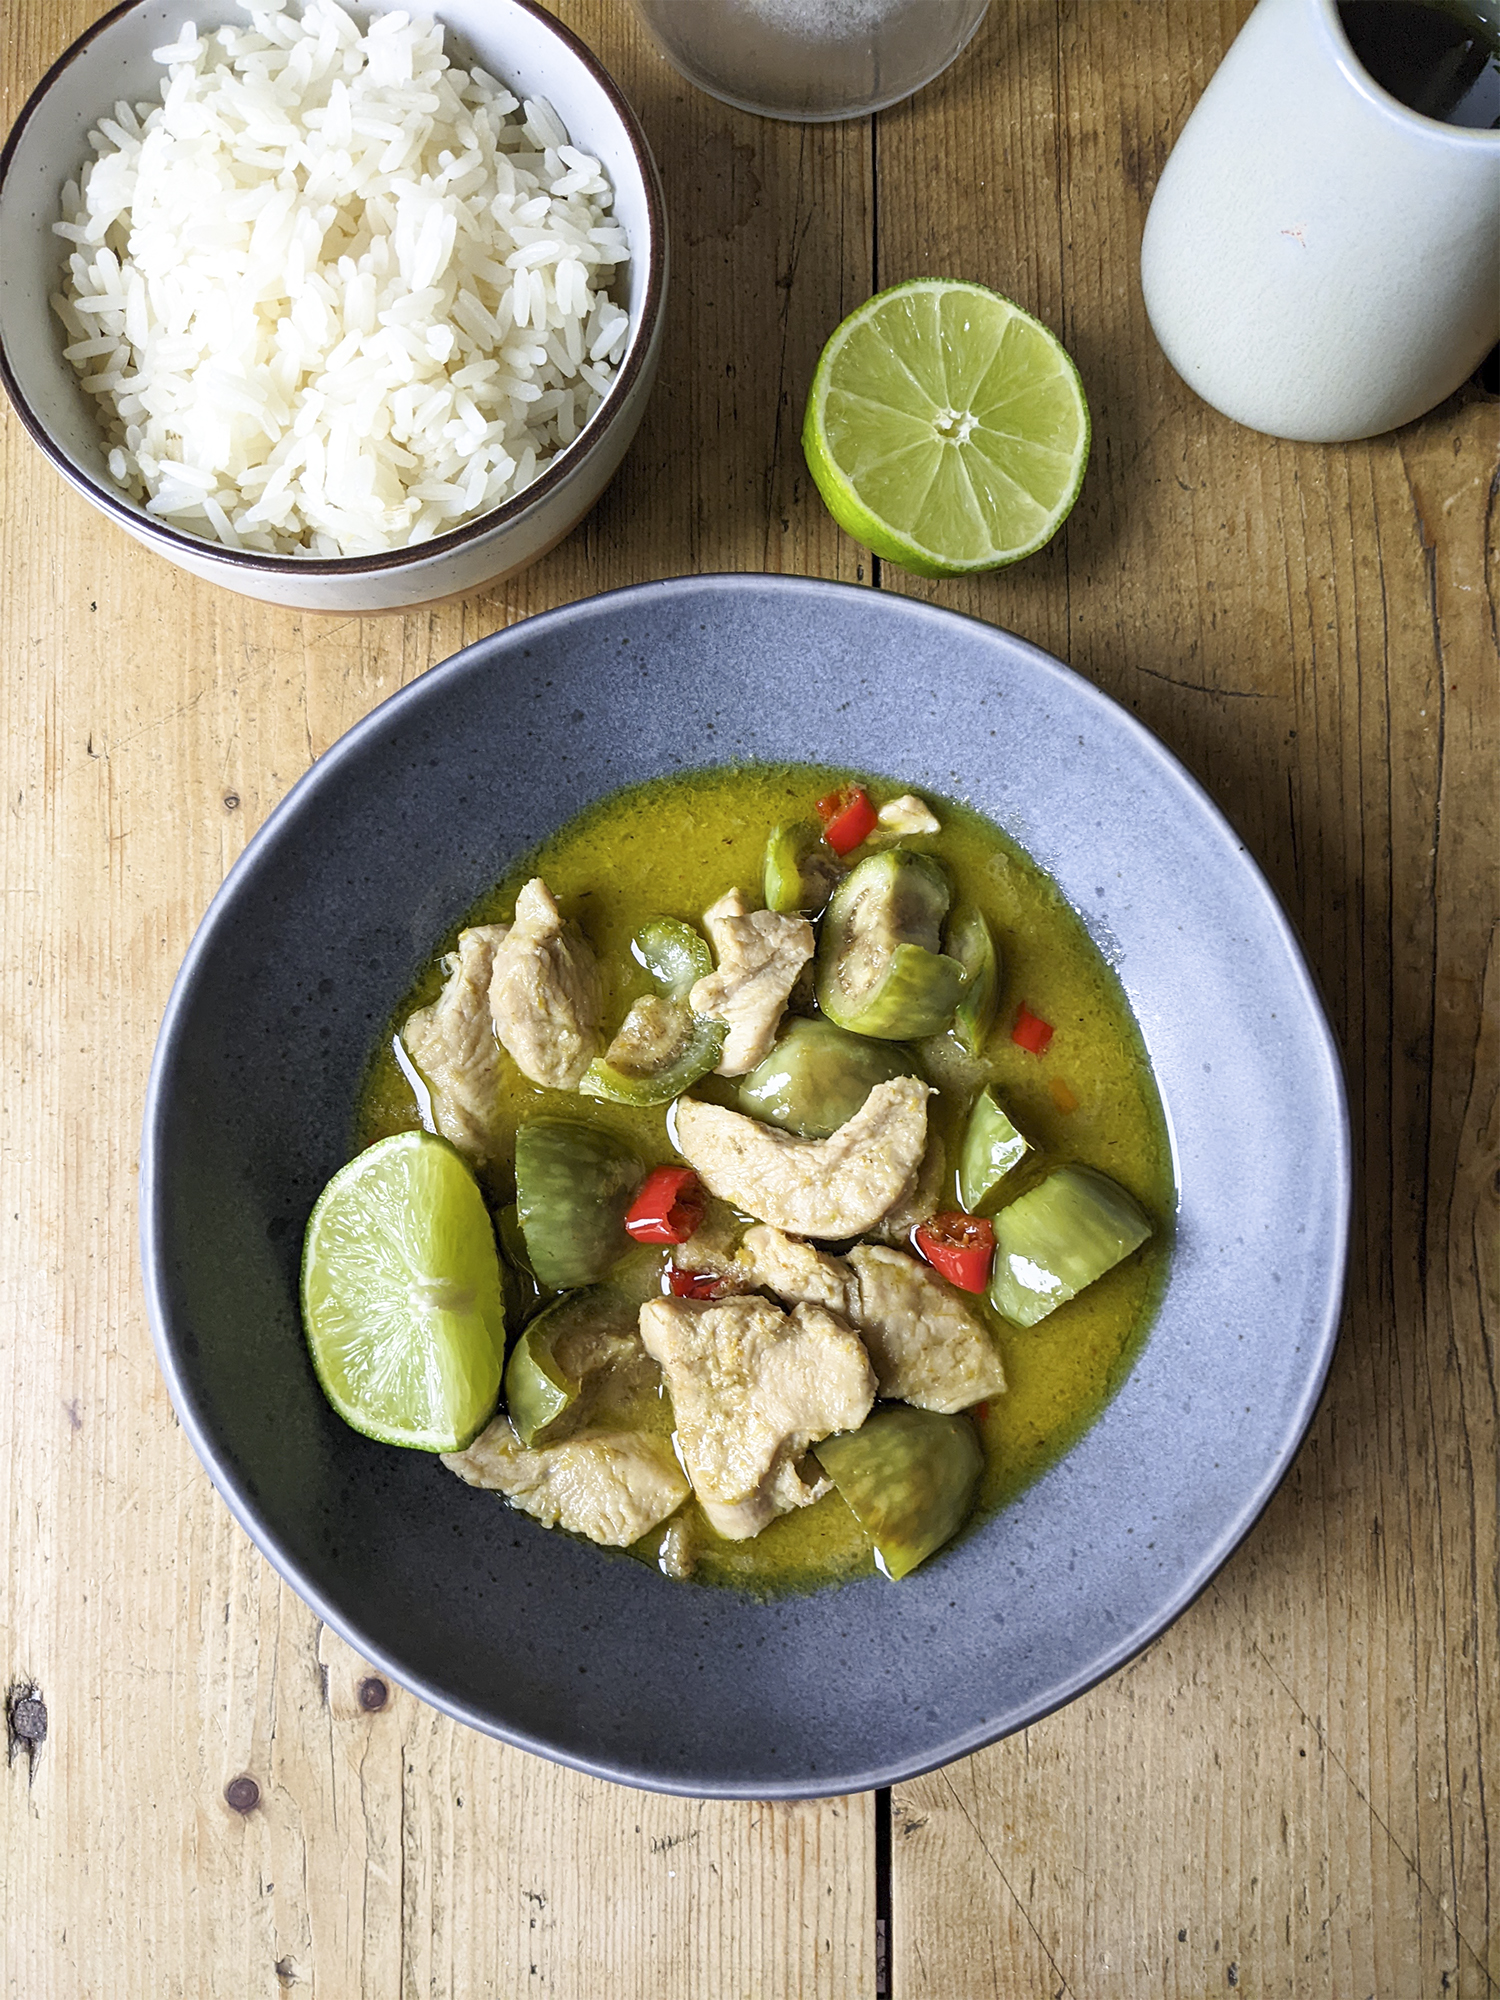 A basic authentic green Thai curry with chicken, Thai eggplants, lime and red chilli + a small bowl of rice on the side. Served in Tiger ceramic blue bowl.